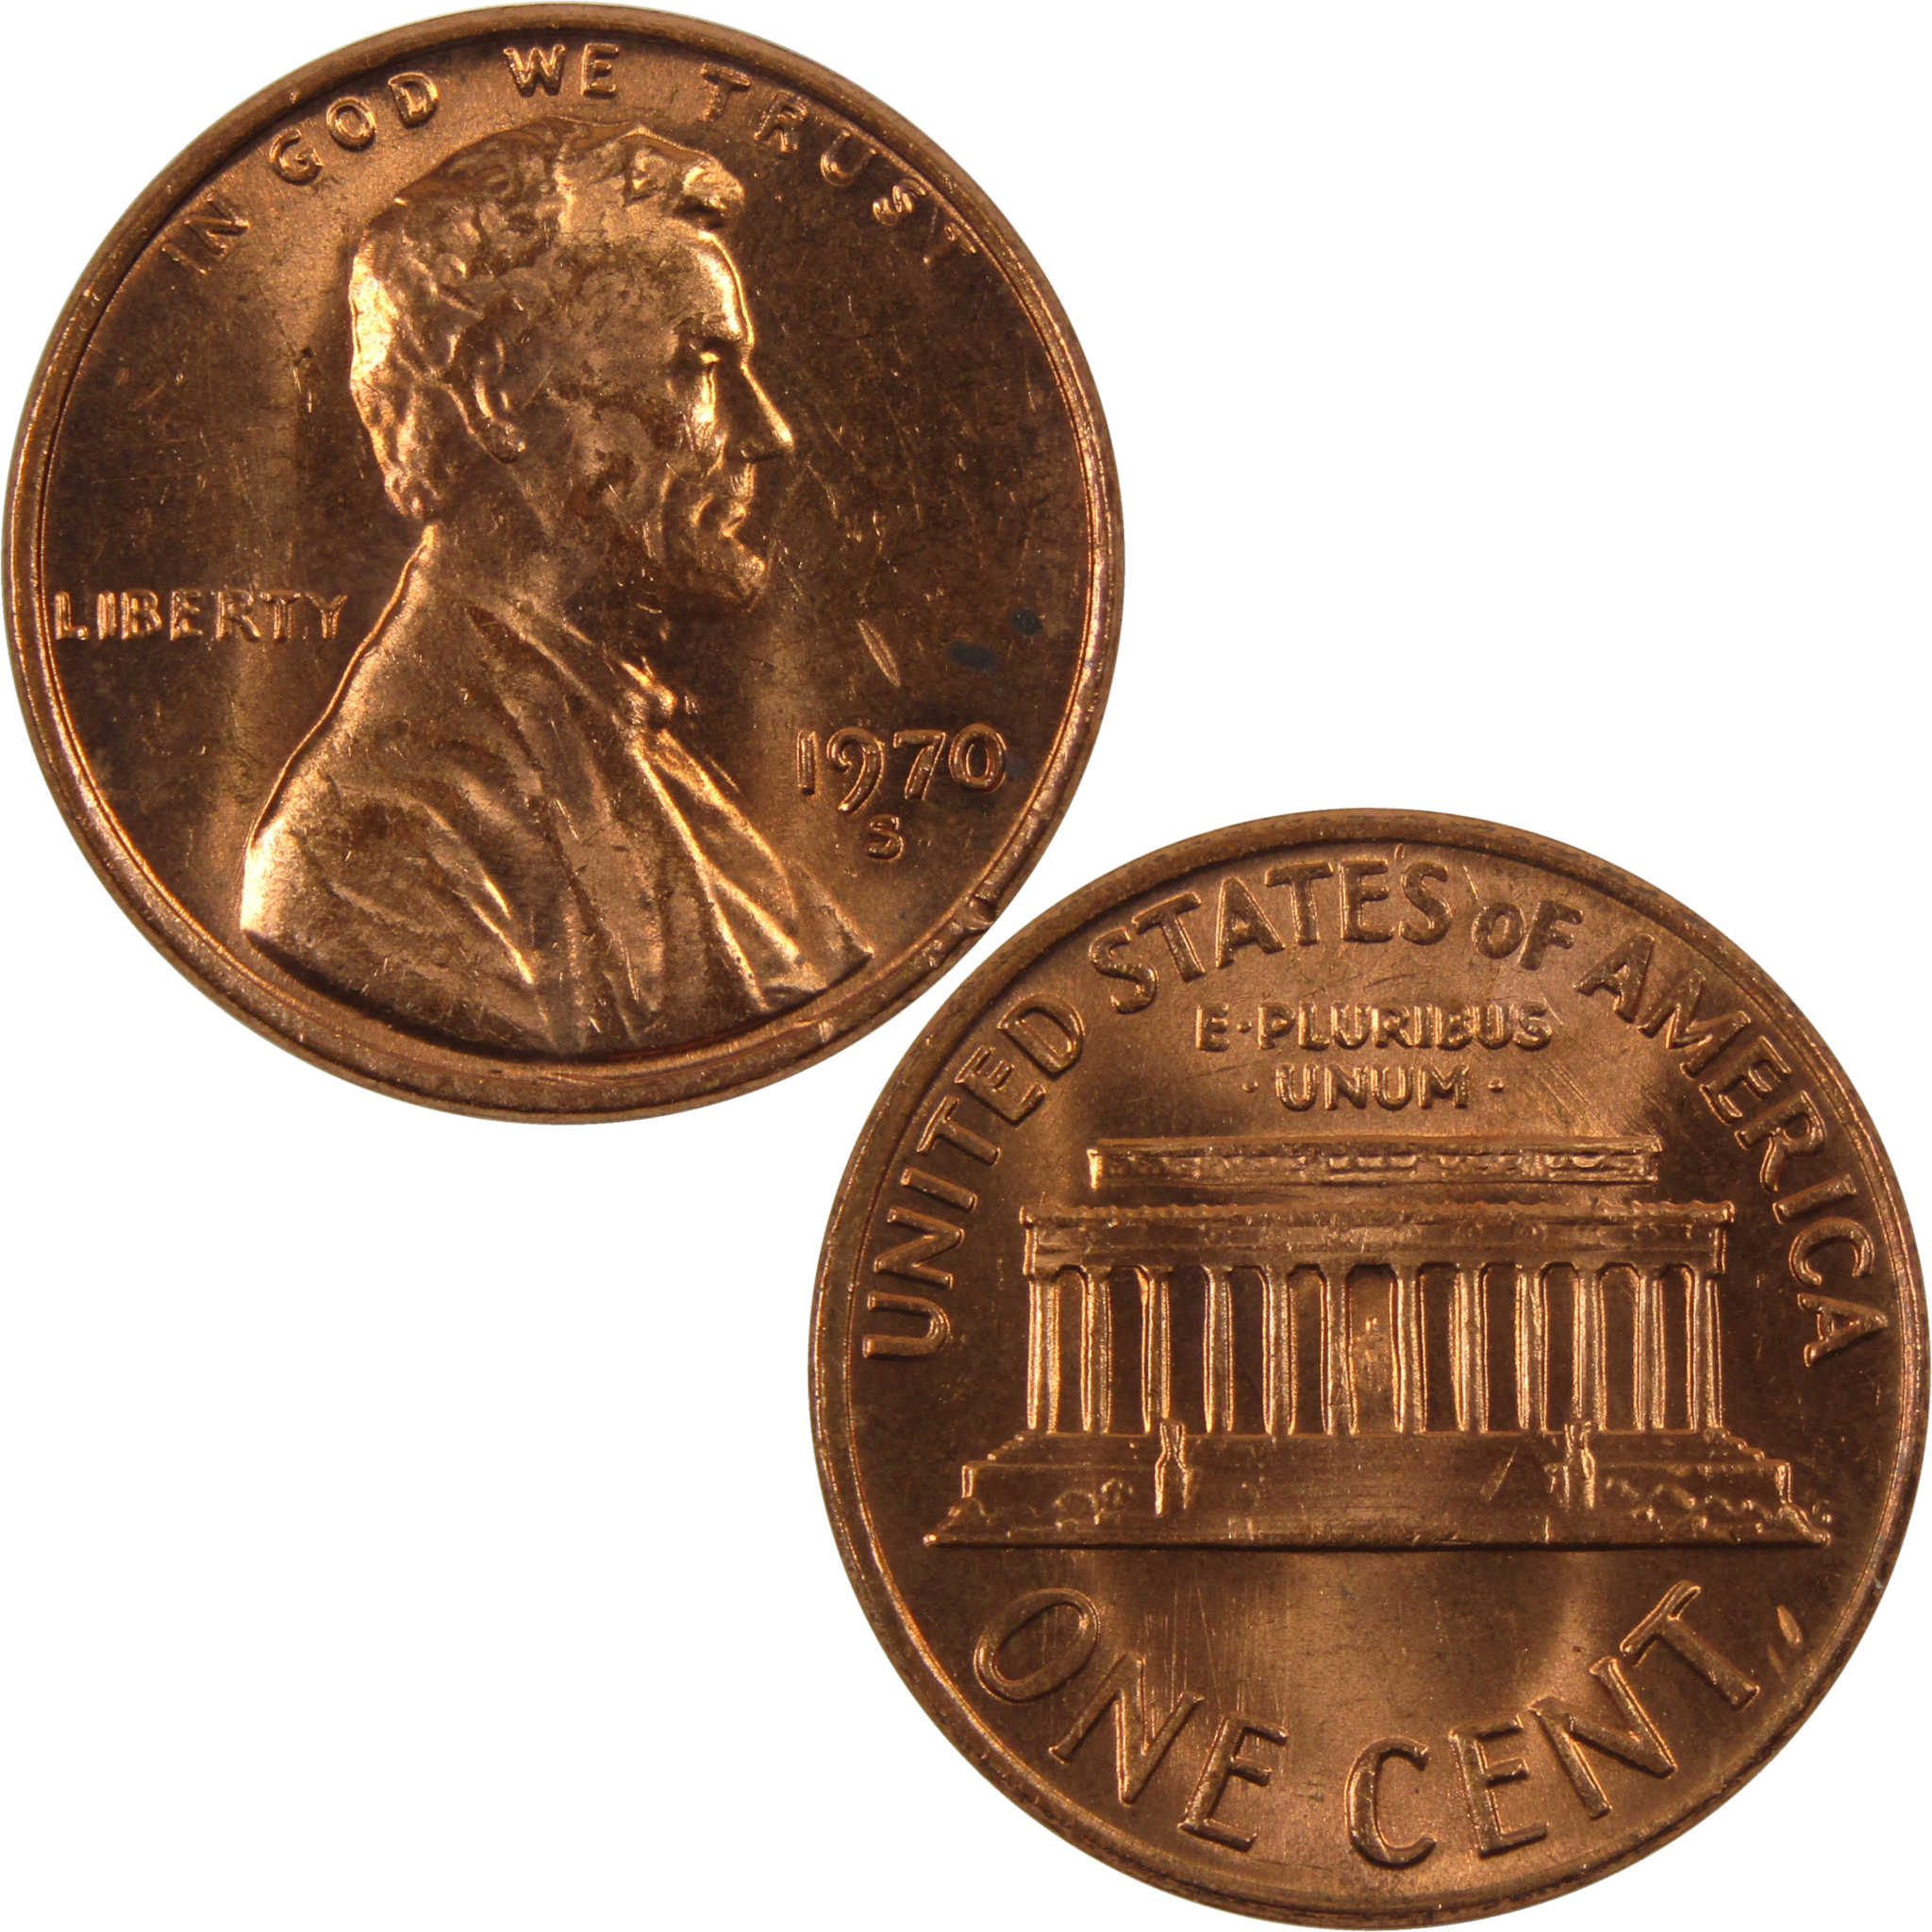 1970 S Large Date Lincoln Memorial Cent BU Uncirculated Penny 1c Coin